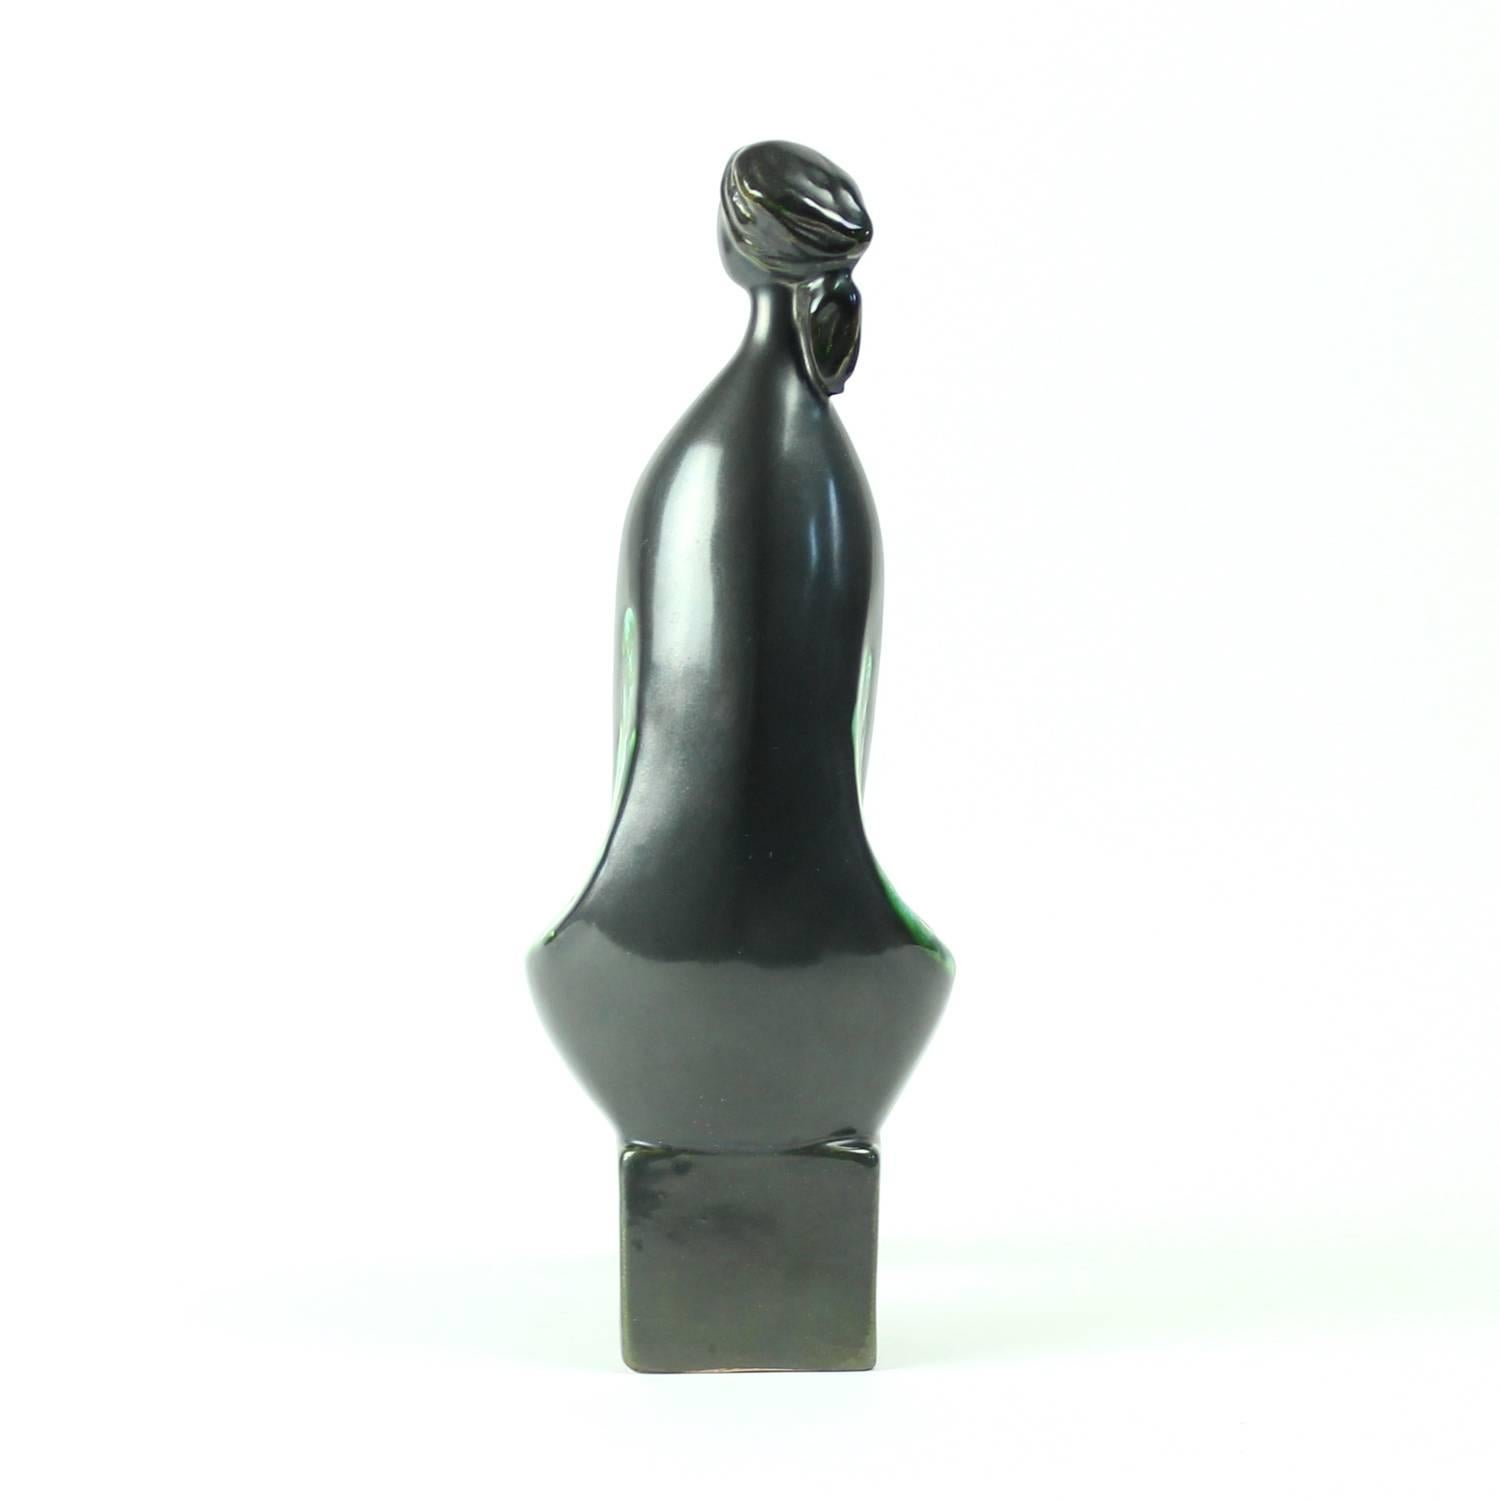 Ceramic Woman Statue with Metallic Glaze by Keramia, Czechoslovakia, circa 1960 In Excellent Condition For Sale In Zohor, SK